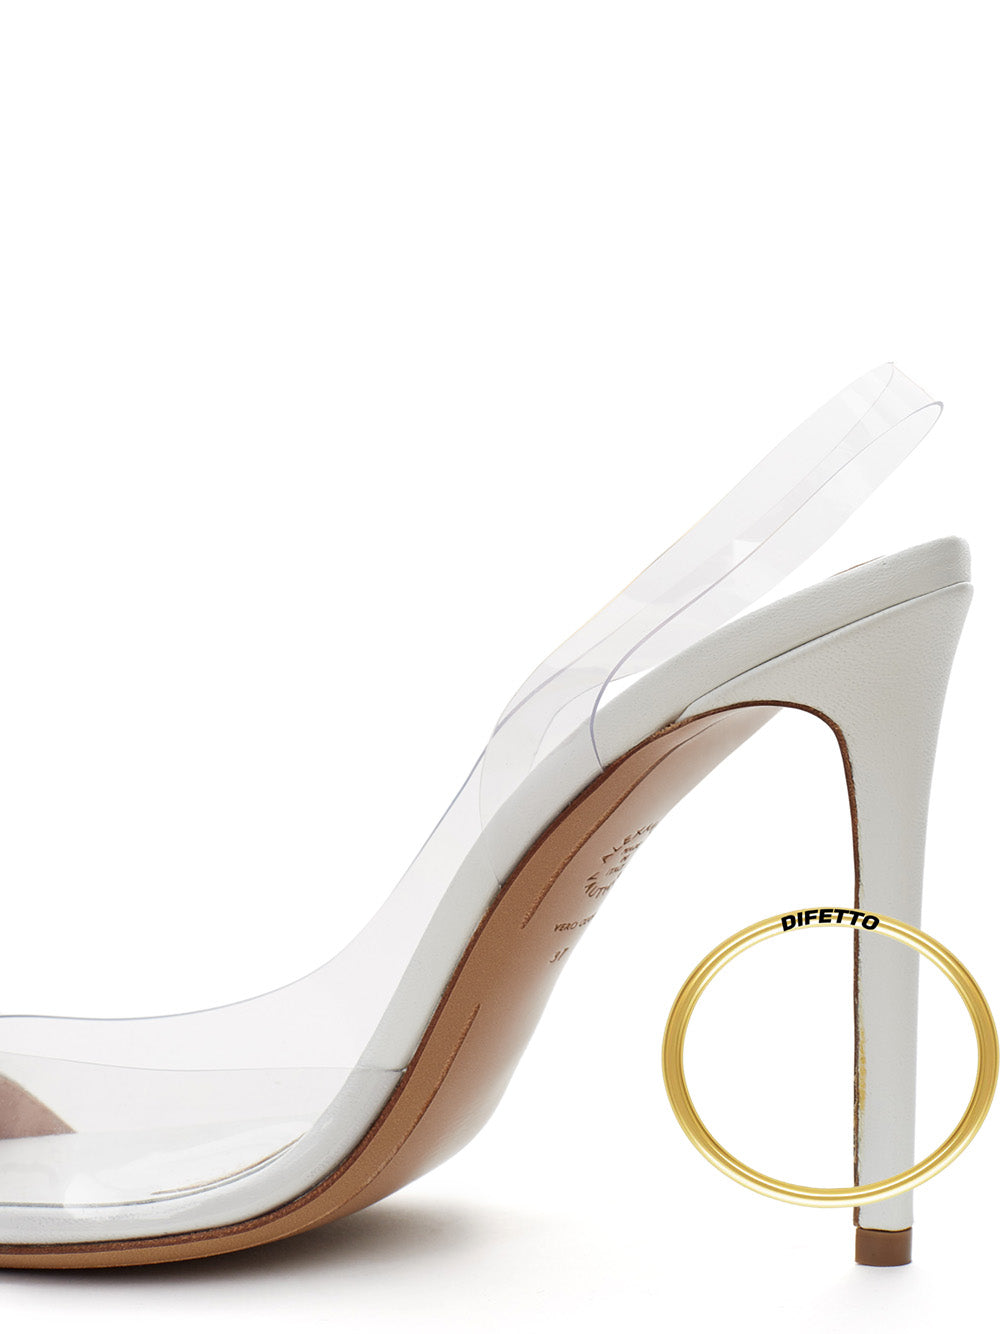 Alexandre Vauthier Amber Ghost pumps in PVC